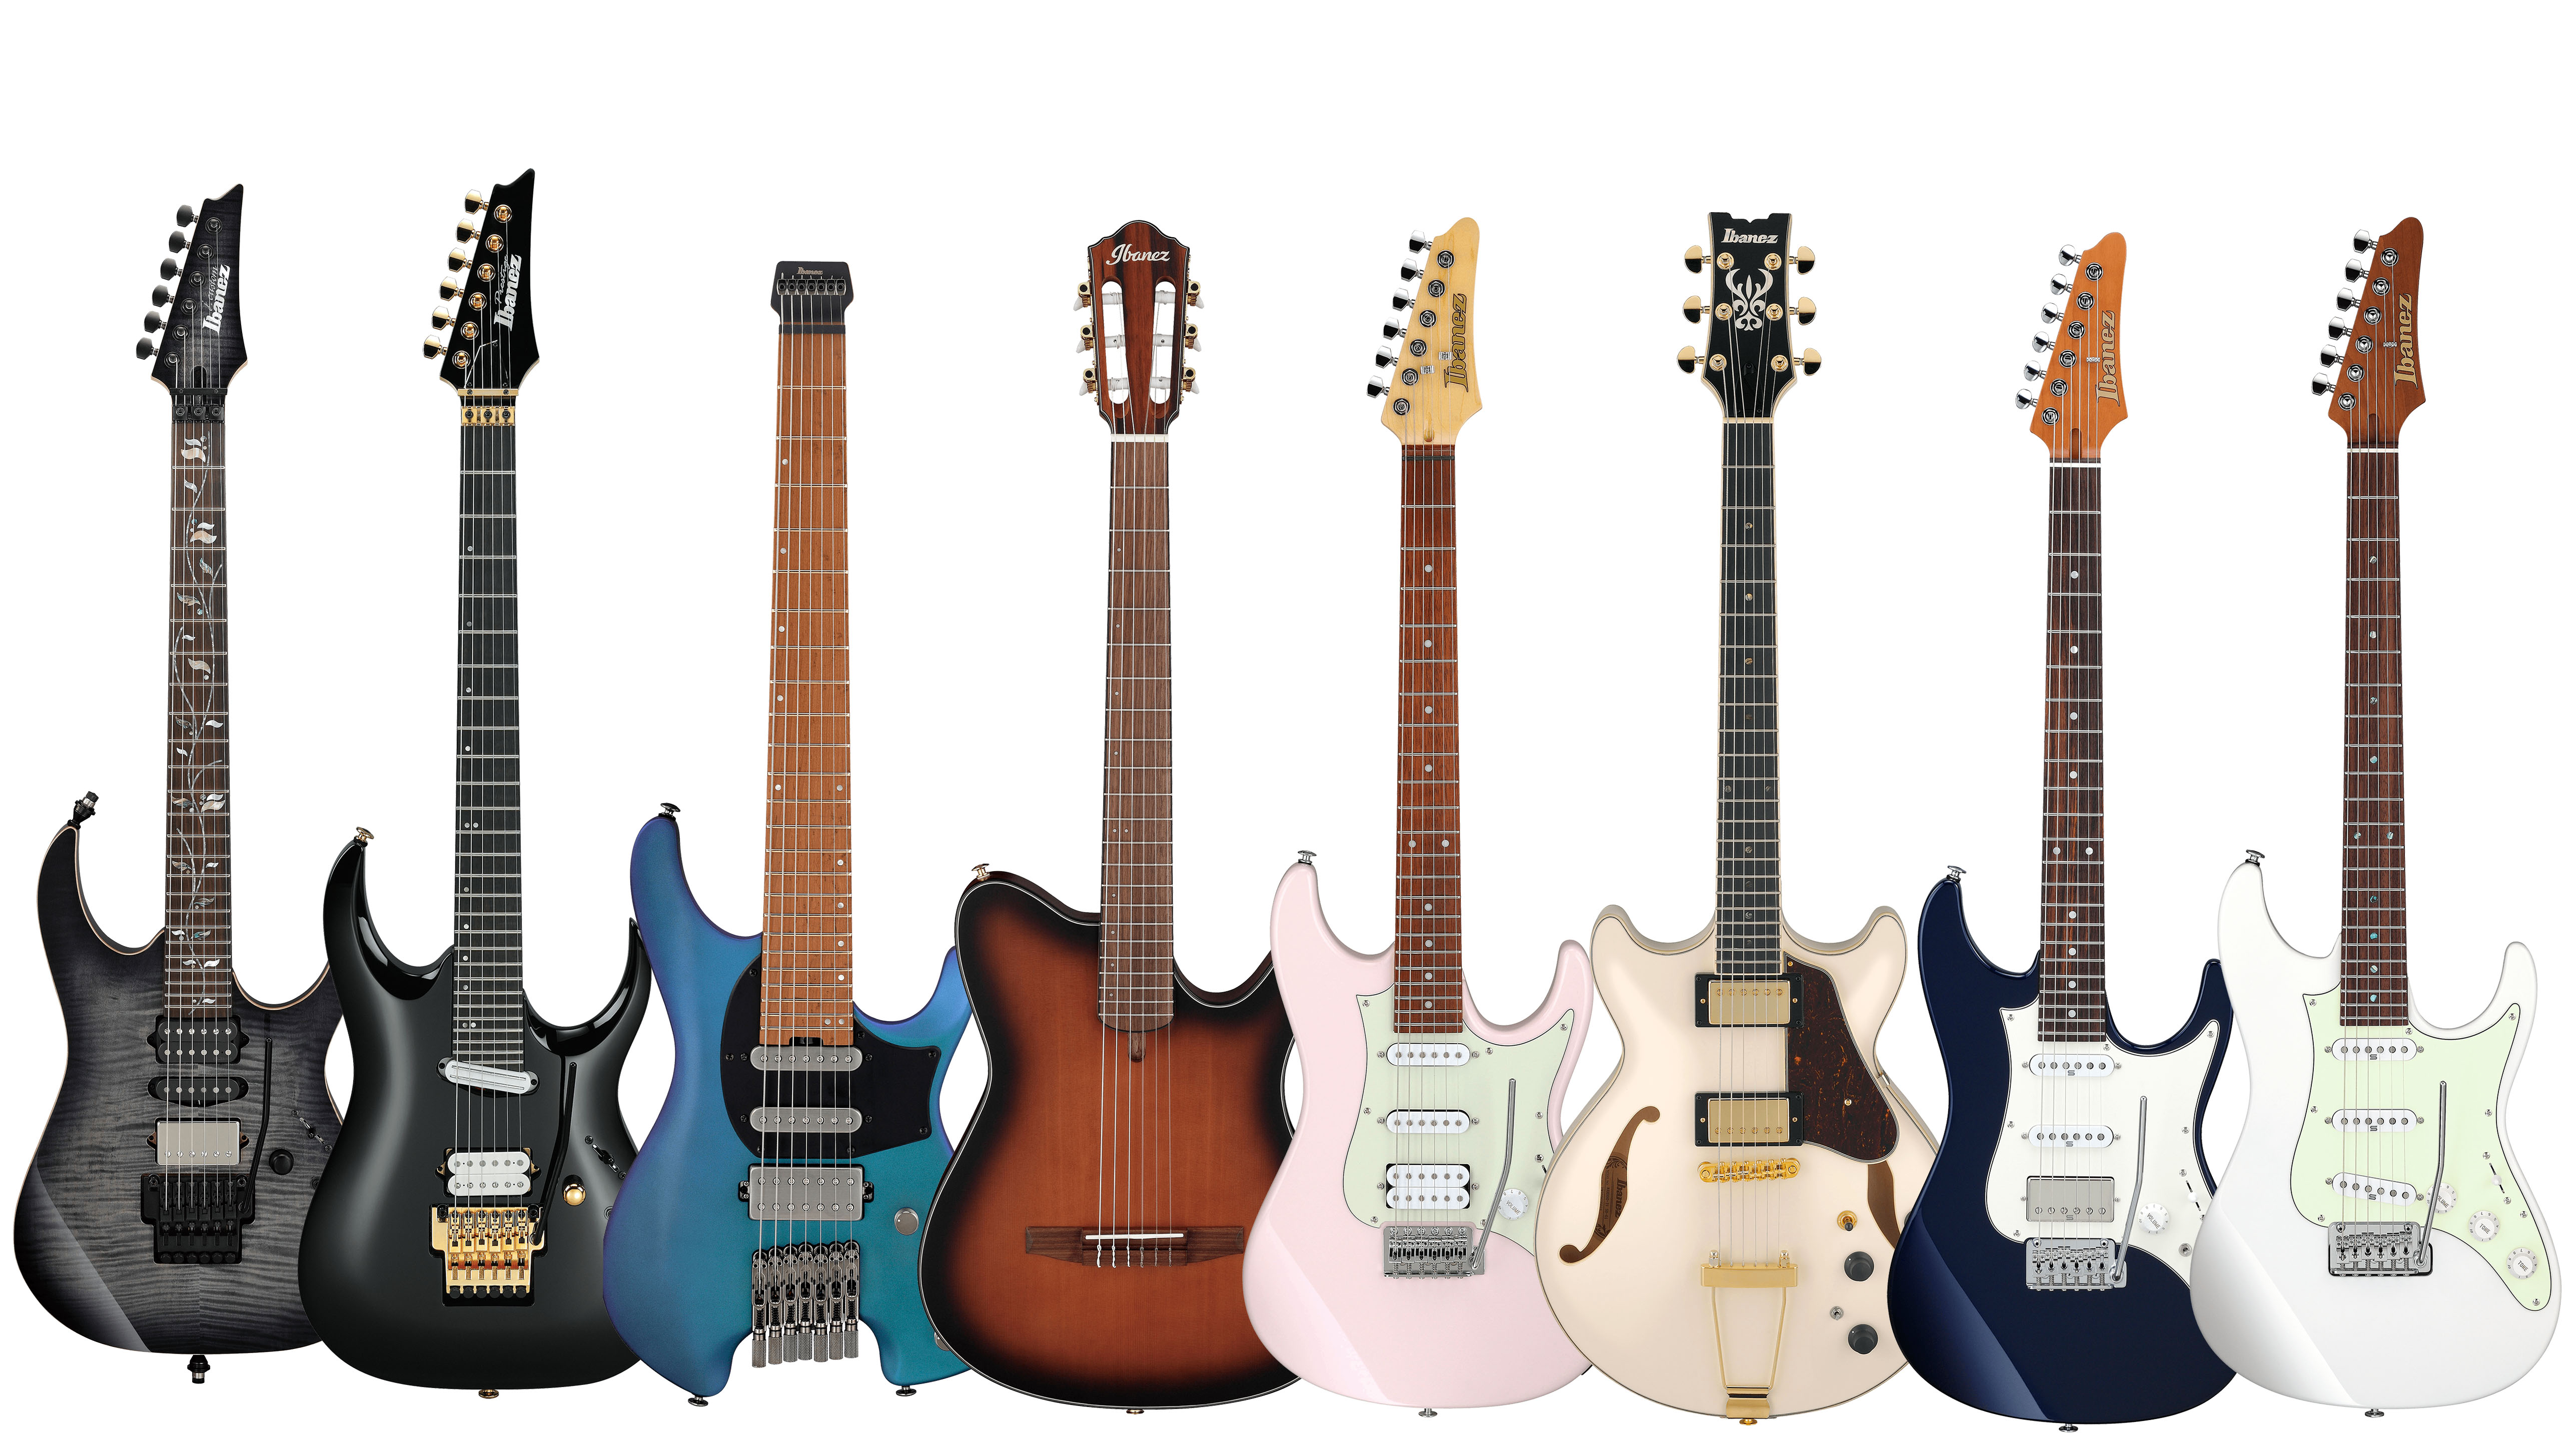 Resten lokalisere Rå The 8 new Ibanez guitars we're most excited to try in 2023 | MusicRadar